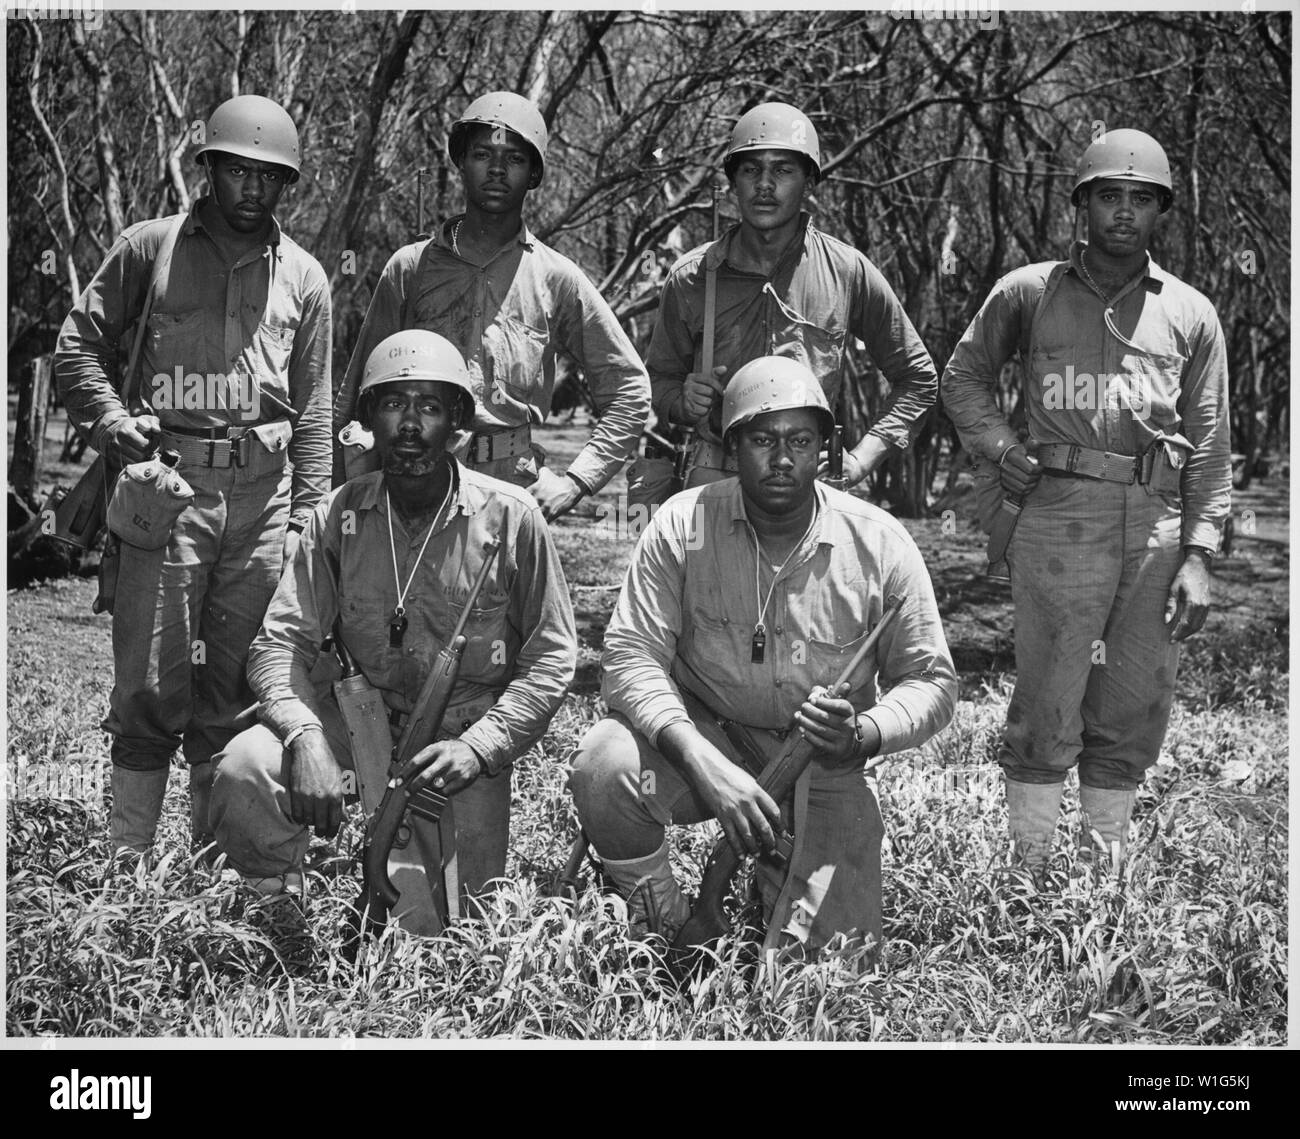 Leading petty officers of one of the Navy's new Logistics Support Companies... This company is undergoing combat training by Service Force Advance Base Section at a station on Oahu Island prior to their departure for duty in a combat area., 05/10/1945; Scope and content:  Left to right, front row: Boatswain Mate Second Class James W. Chase and Coxswain John D. Perry.  Left to right, back row: Coxswains Raymond C. Vaultz, Elmer Williams, Darrel M. Beech, and Jimmie Cook. Stock Photo